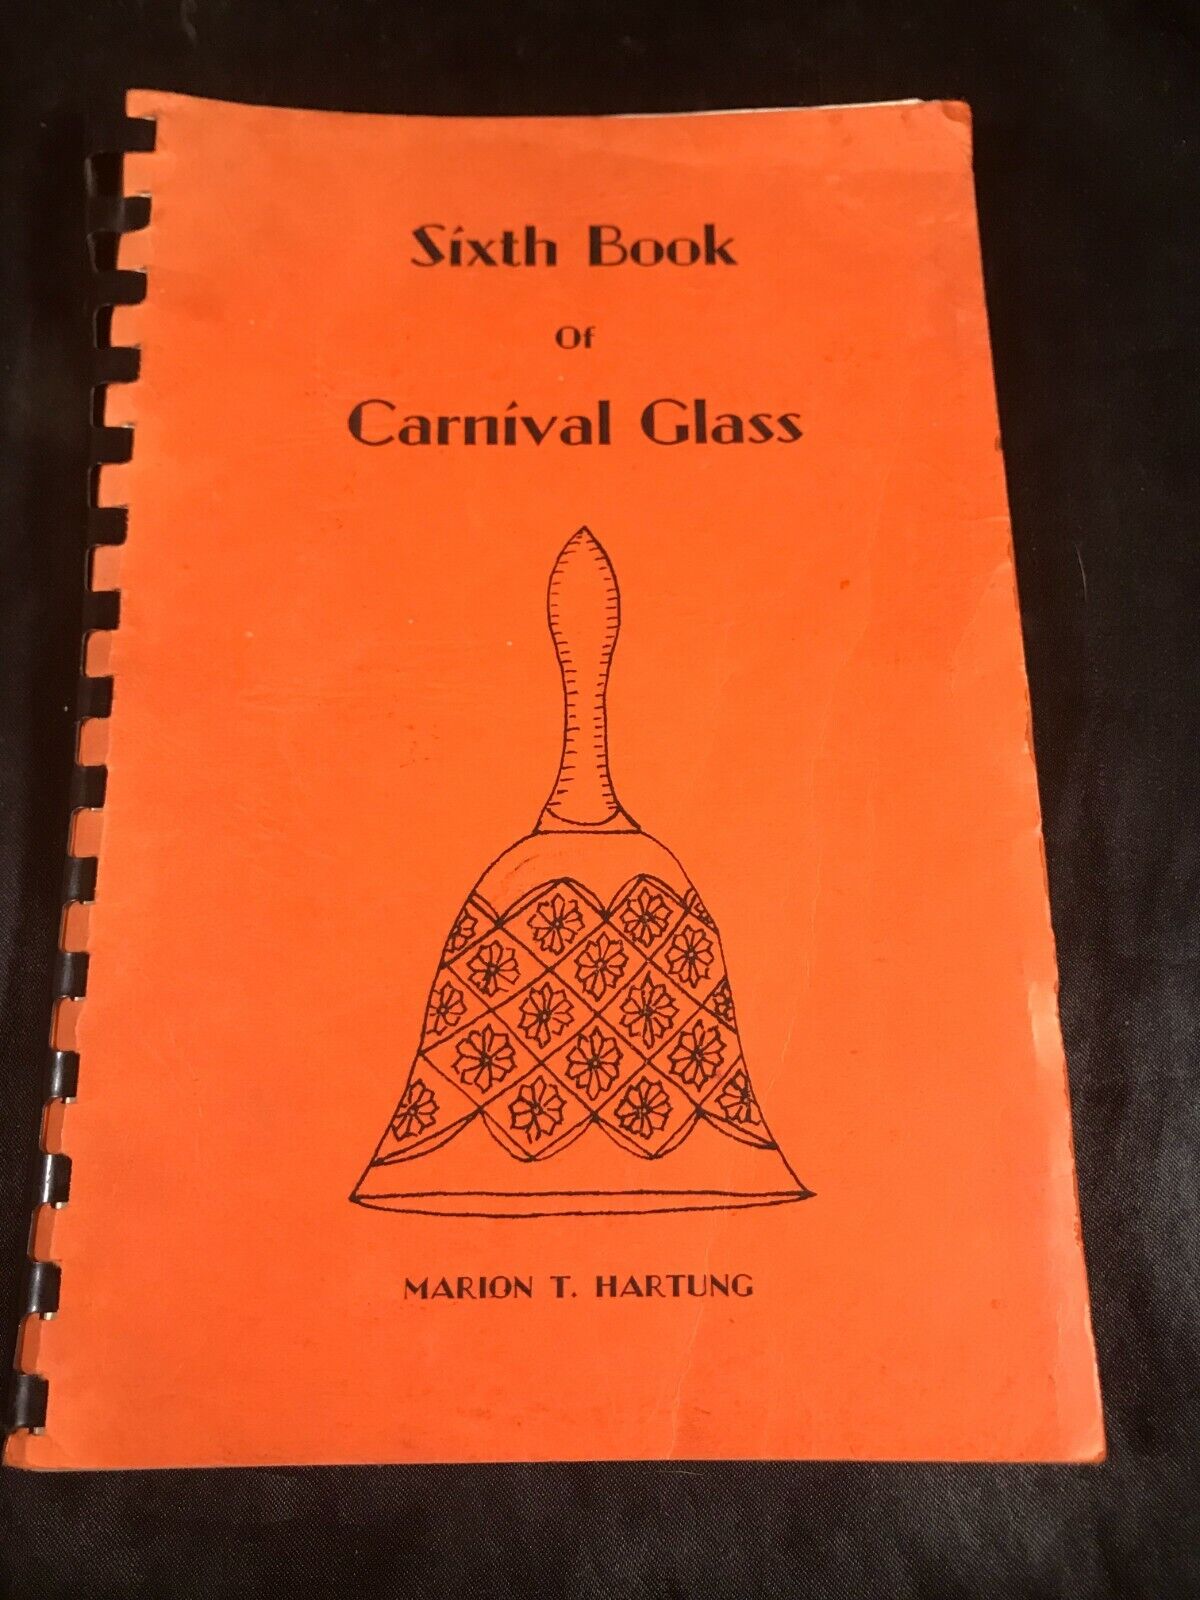 Vintage 1965 Sixth Book of Carnival Glass by Marion T. Hartung